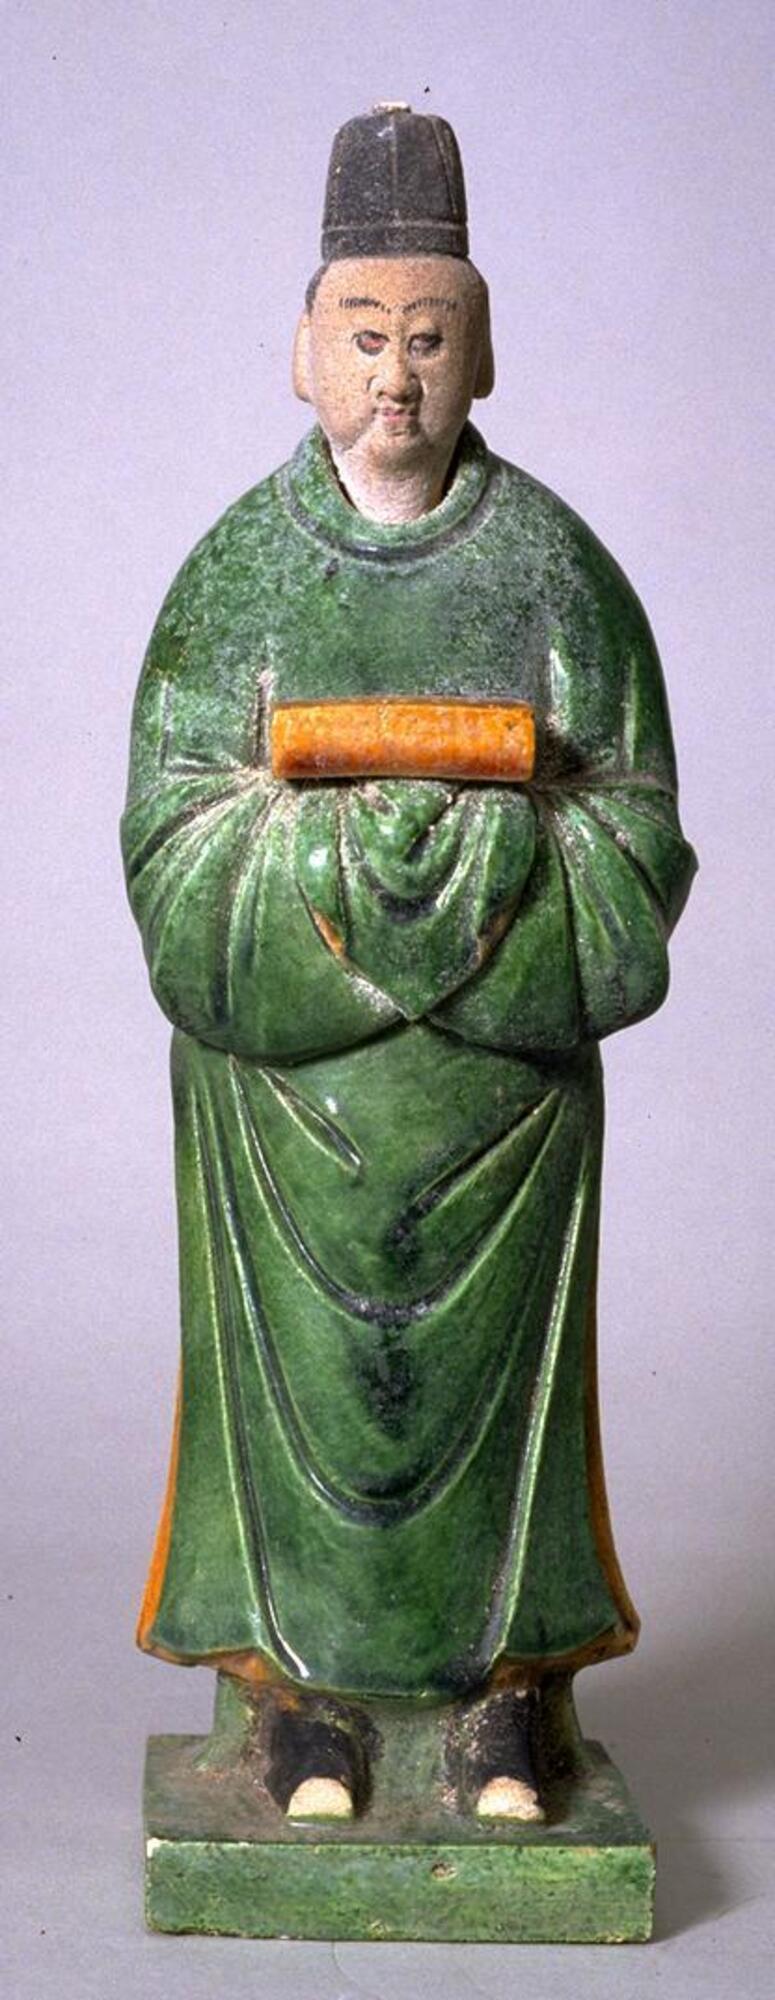 An earthenware male figure standing on a platform wearing long green robes and a tall black hat, holding an amber-colored plaque in his hands, his face painted with polychrome mineral pigments. 